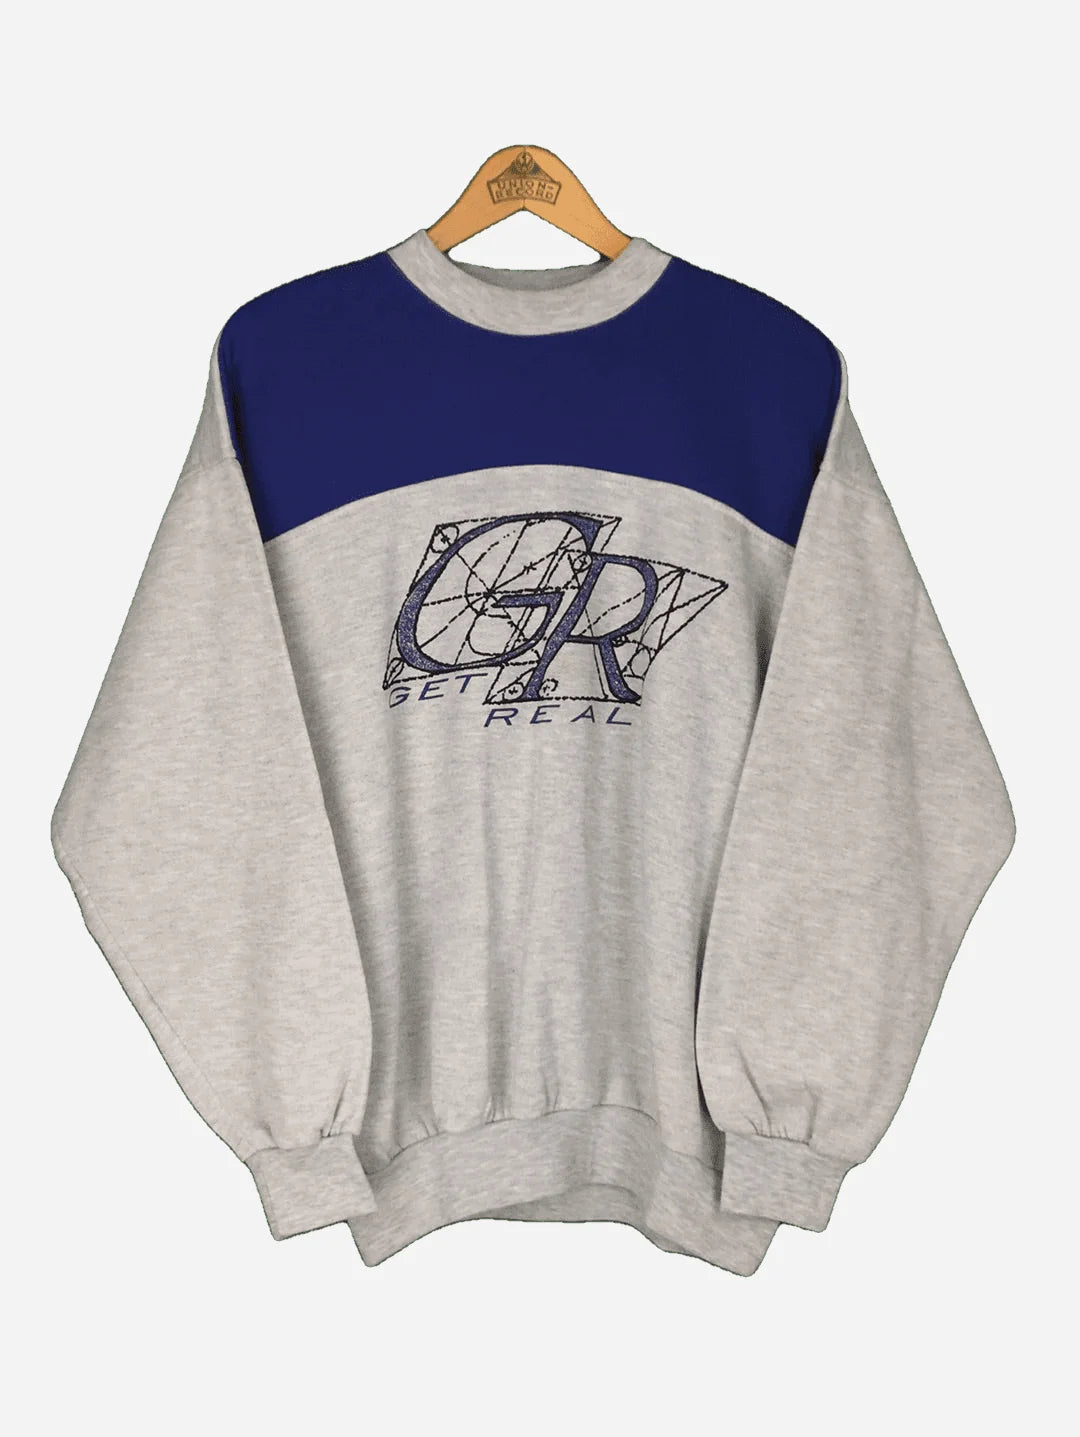 „Get Real“ Sweater (L)